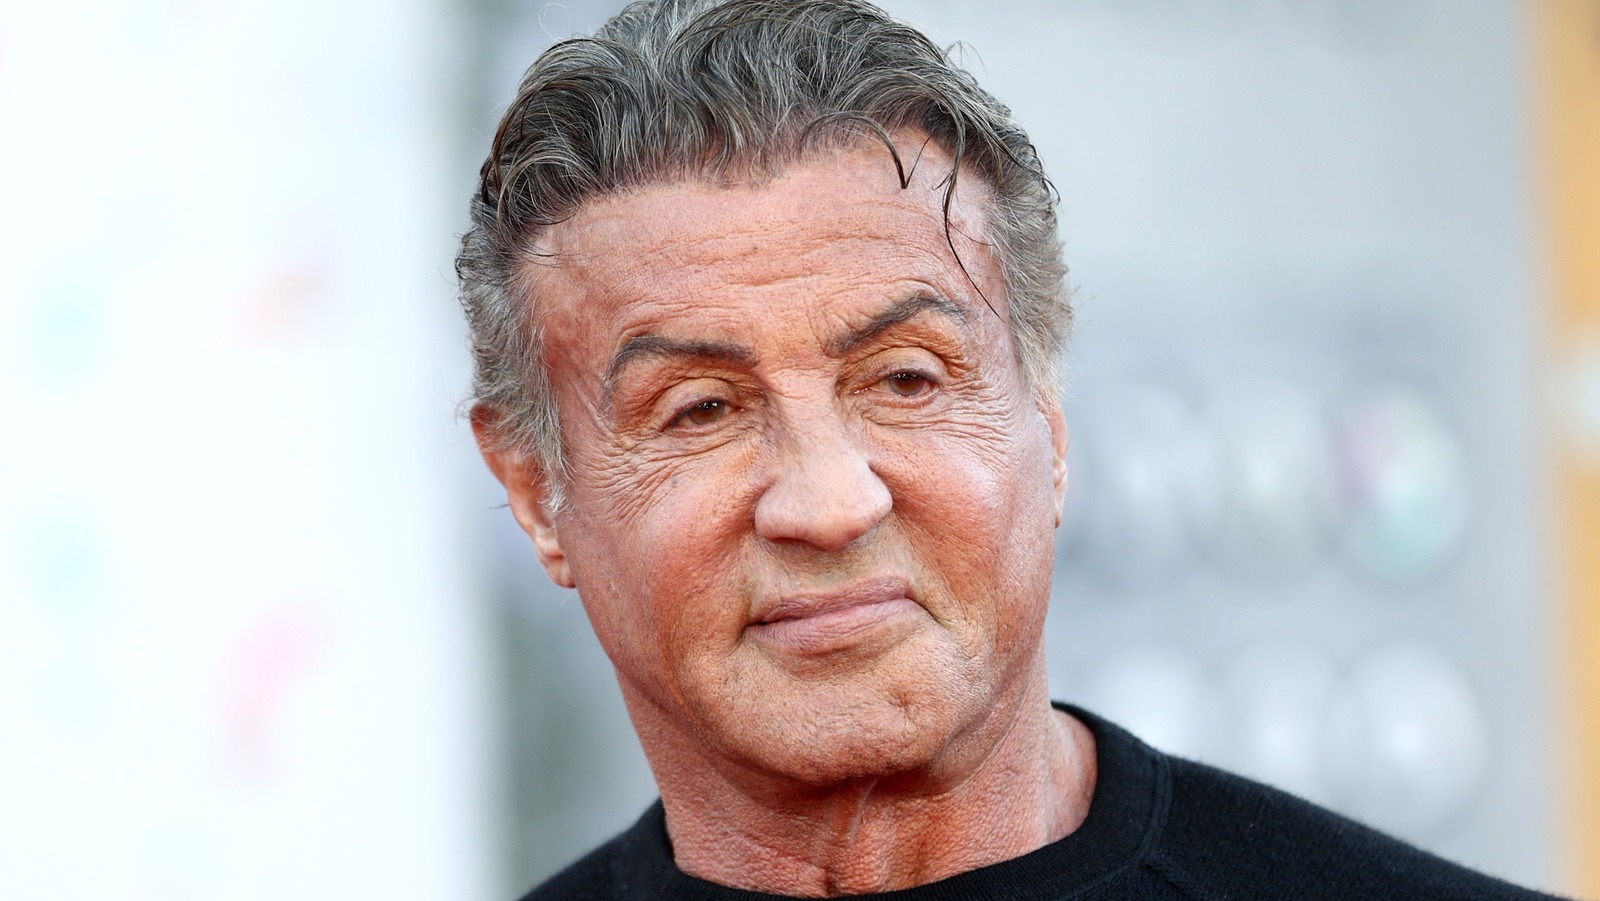 Sylvester Stallone (American Actor) - Age, Height, Wife, Movies, Net Worth